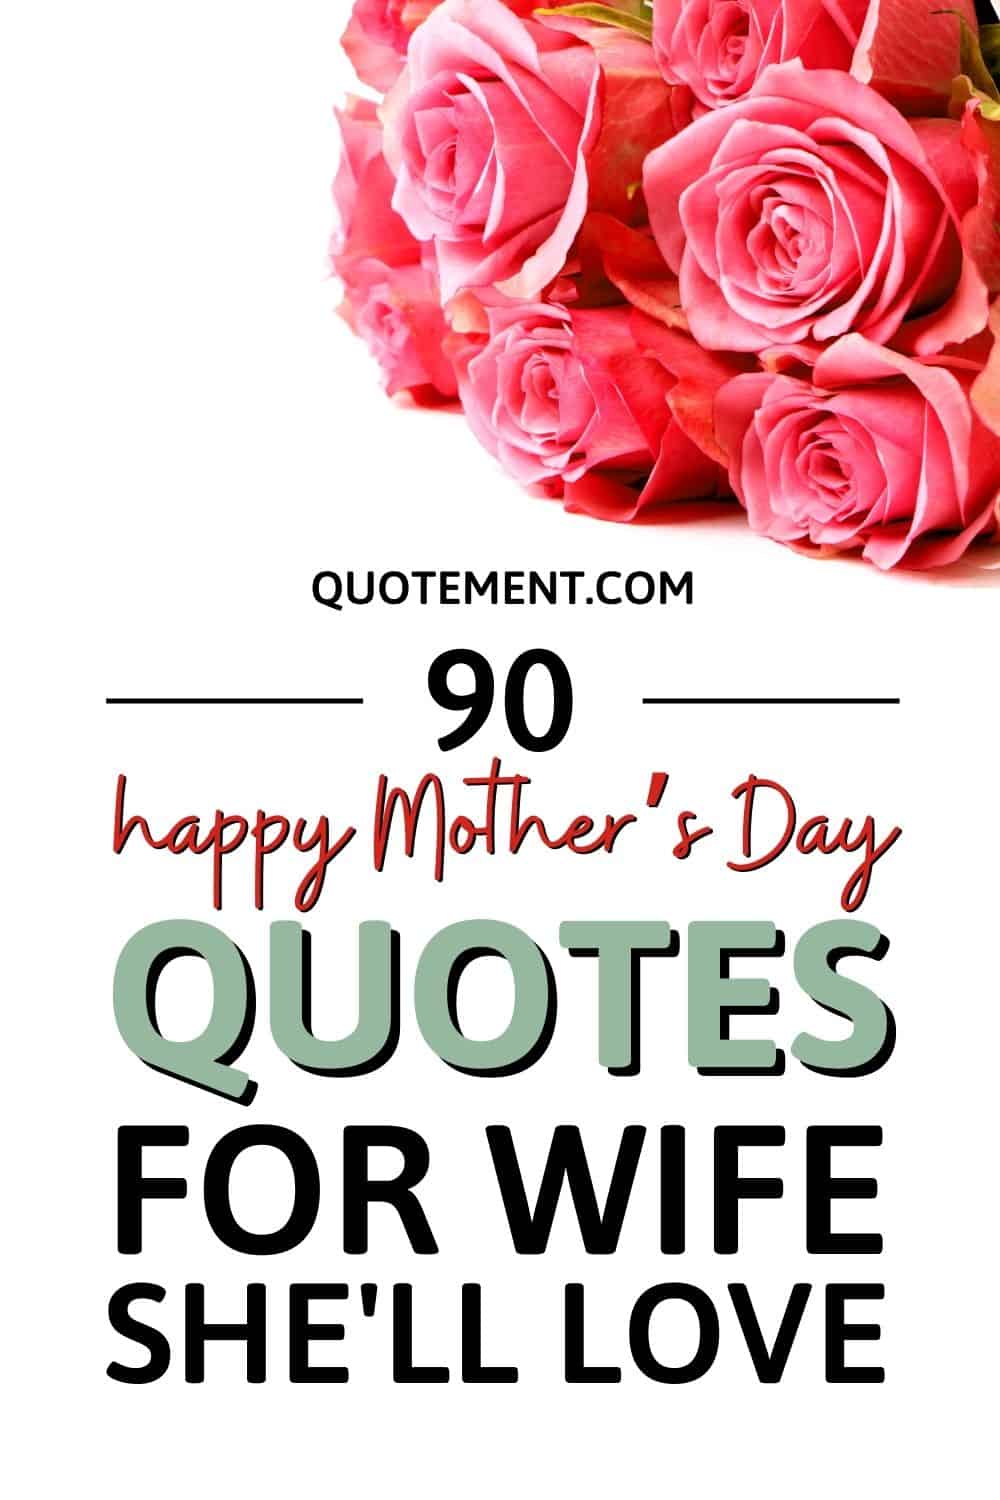 Top 90 Happy Mother’s Day Quotes For Wife To Impress Her